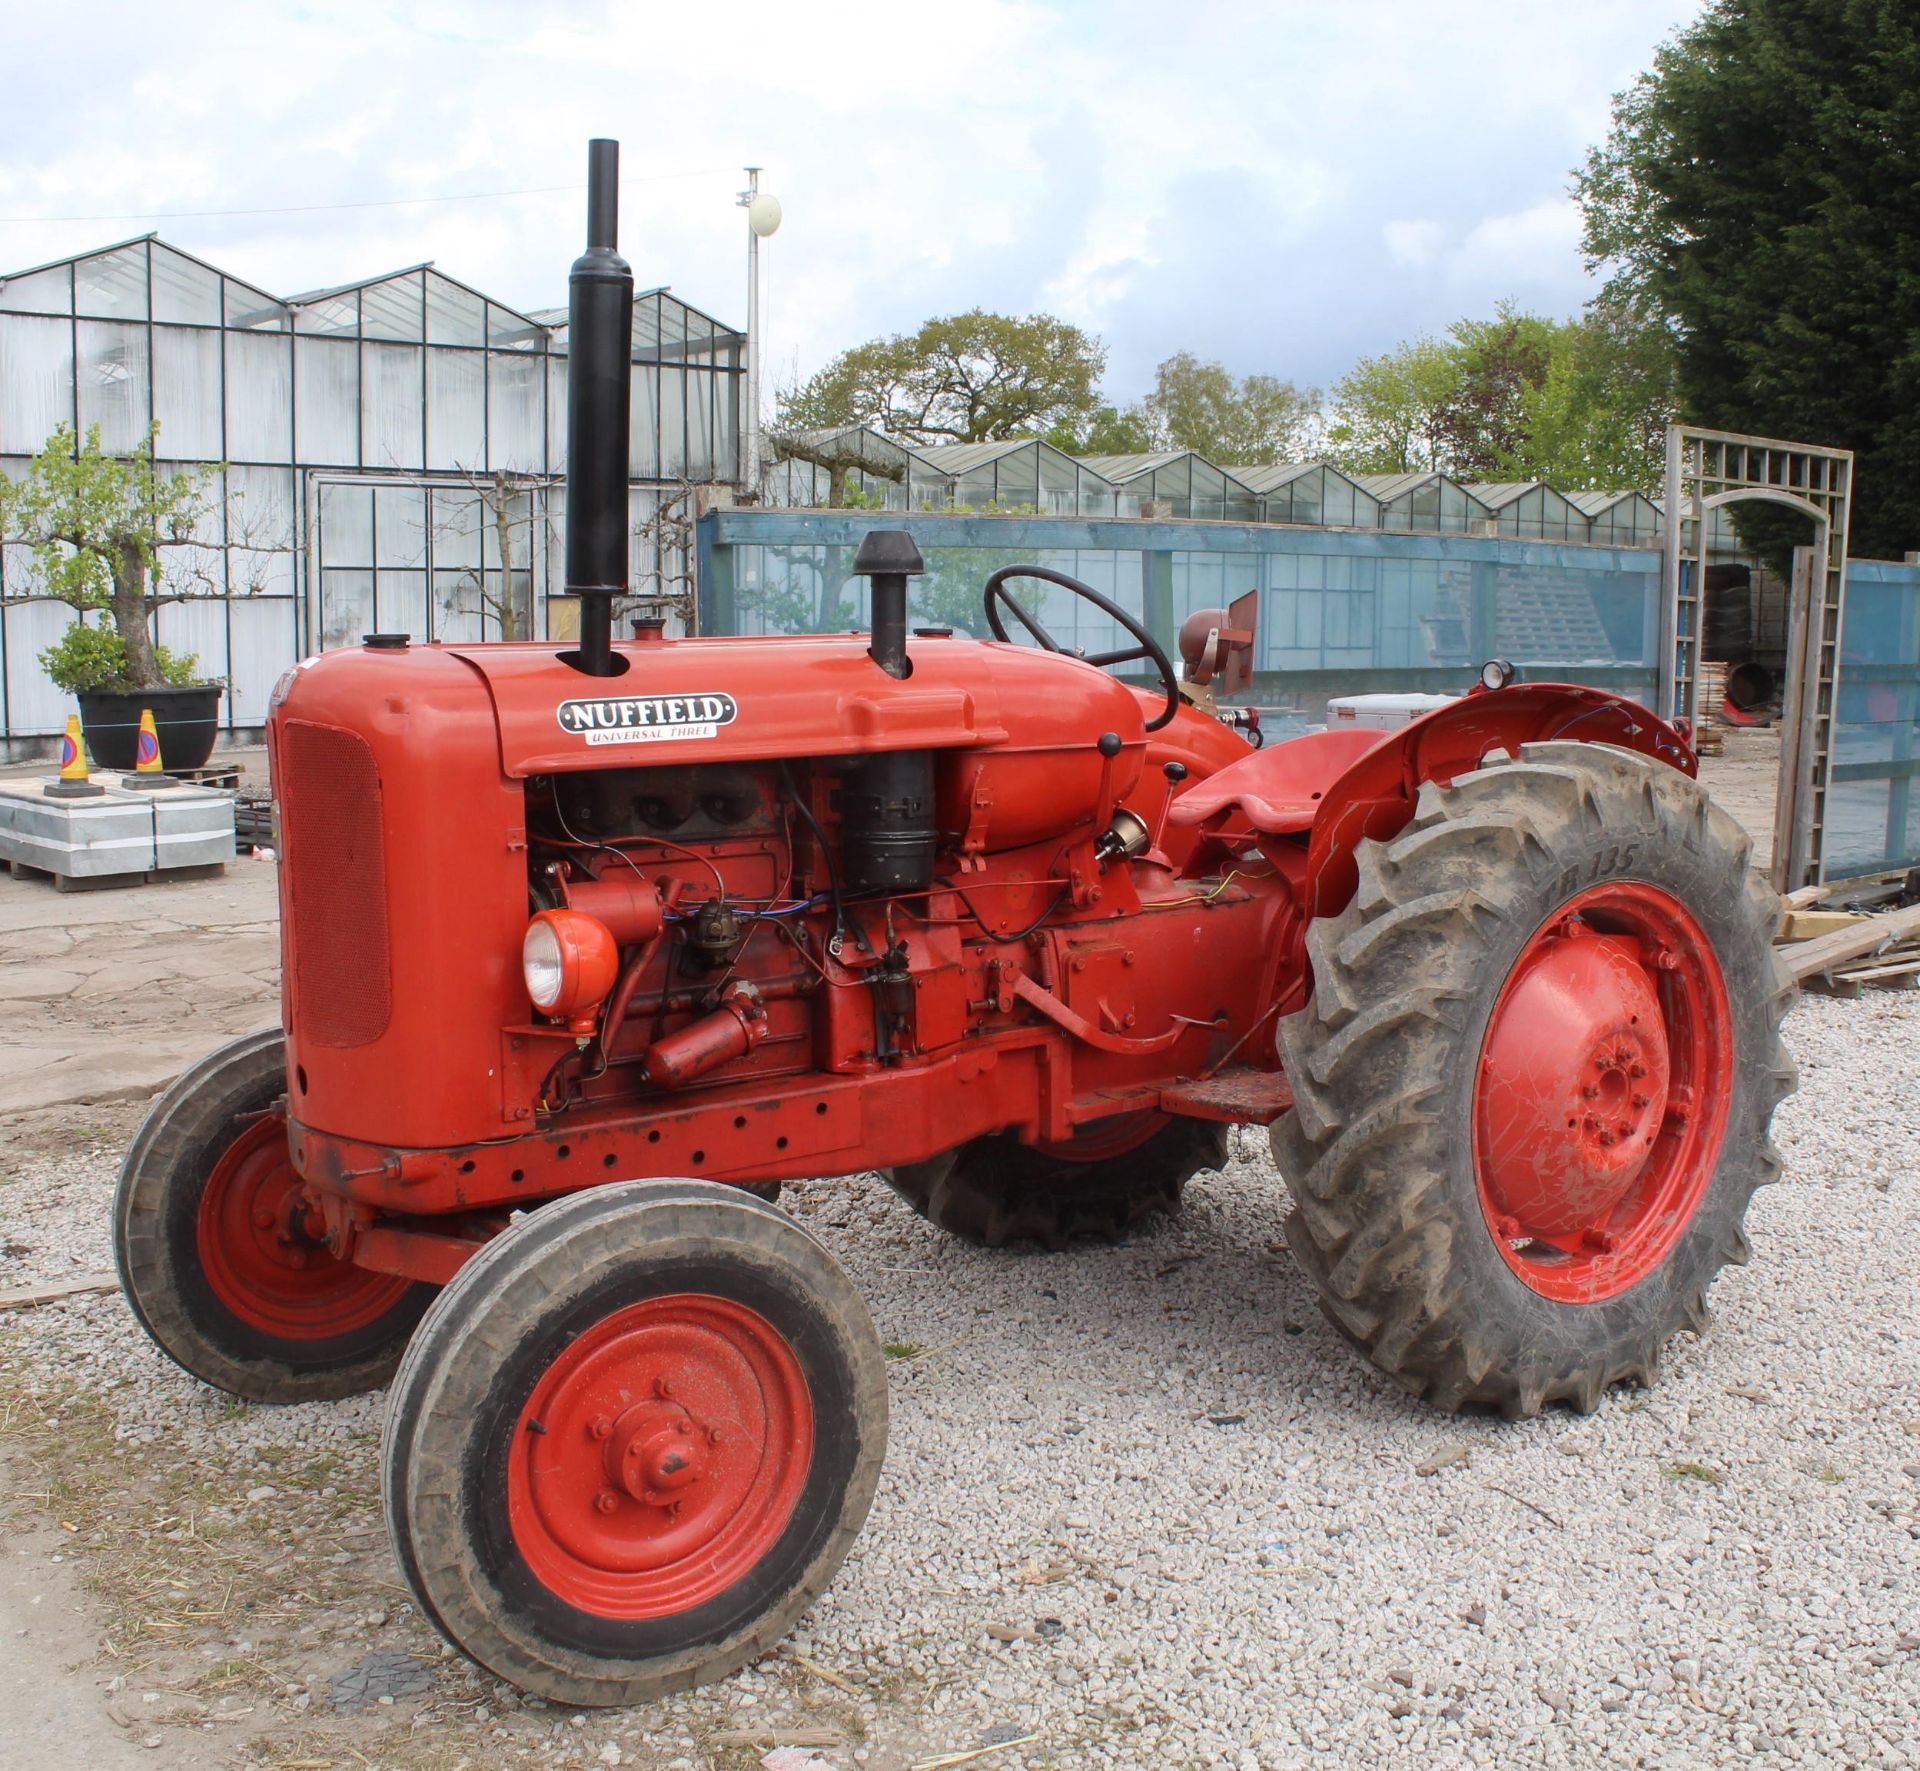 A NUFFIELD UNIVERSAL THREE TRACTOR GOOD ORDER RECENT REBUILD 4 NEW TYRES RE - CON STARTER CLUTCH &